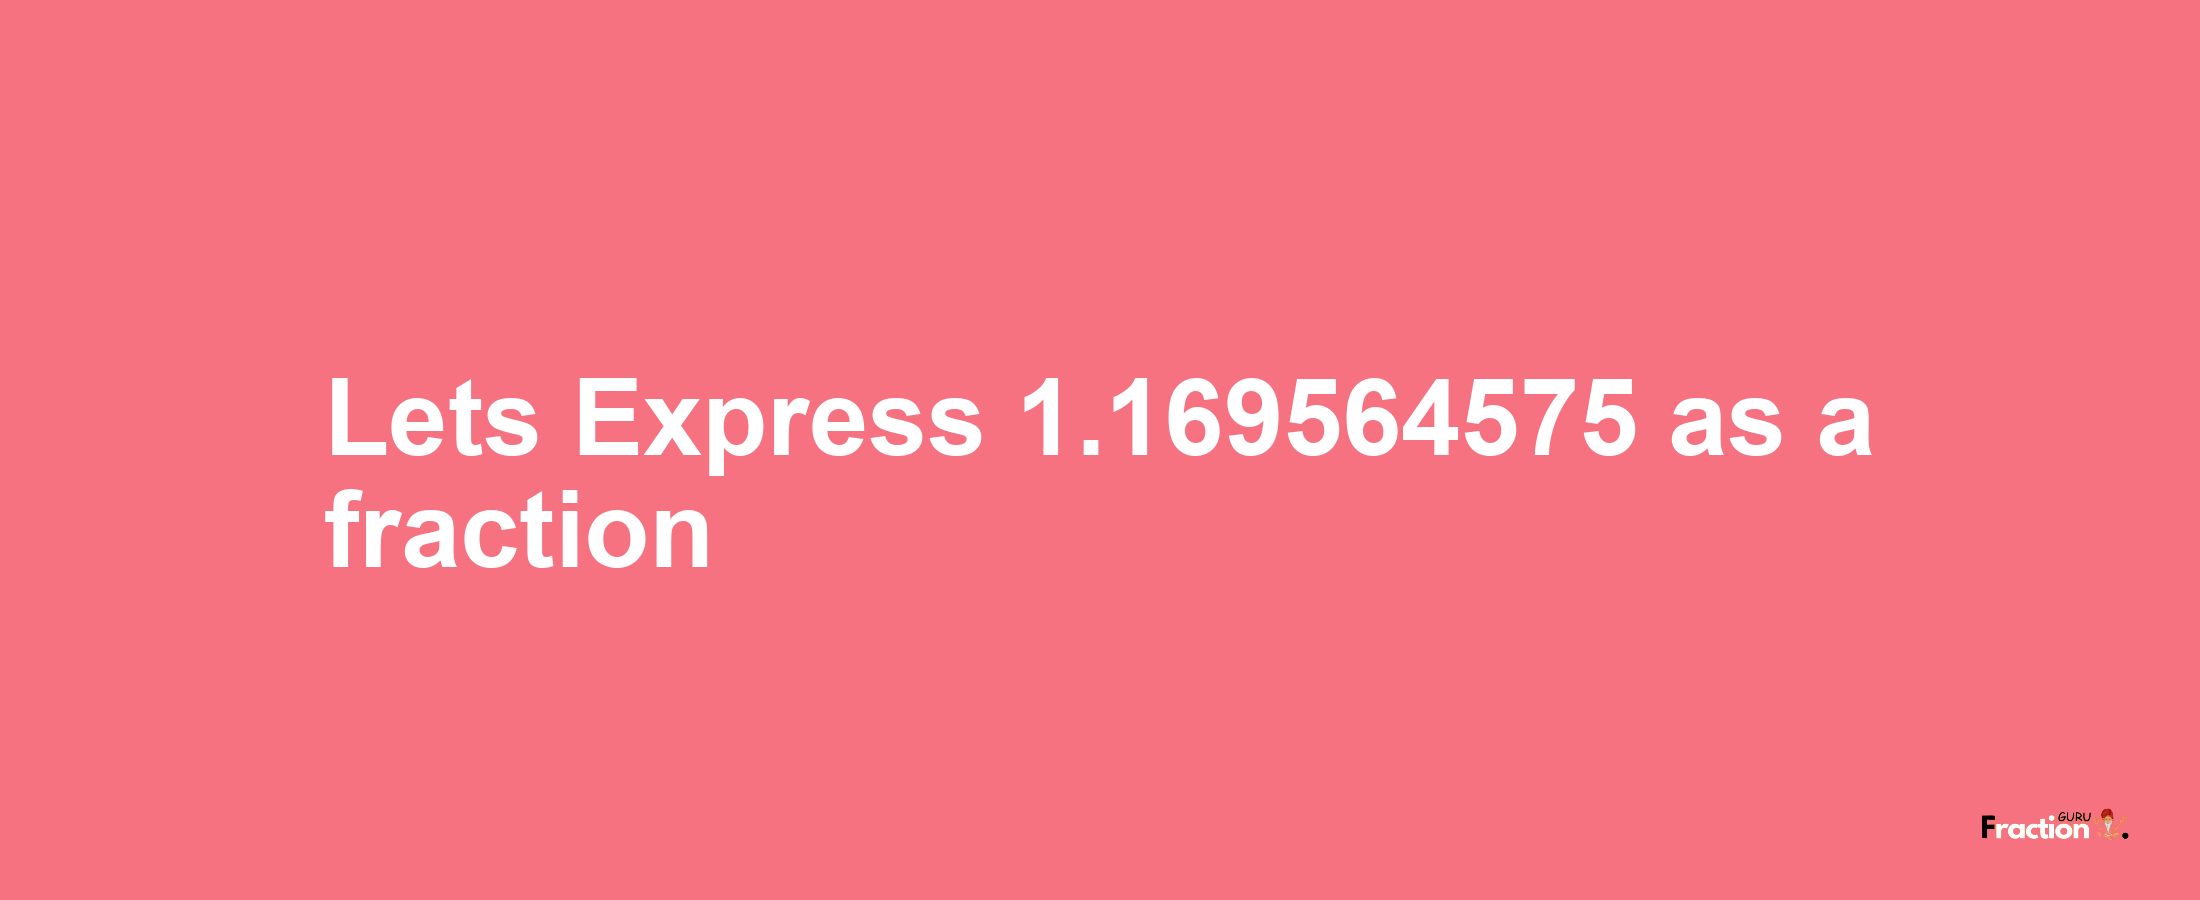 Lets Express 1.169564575 as afraction